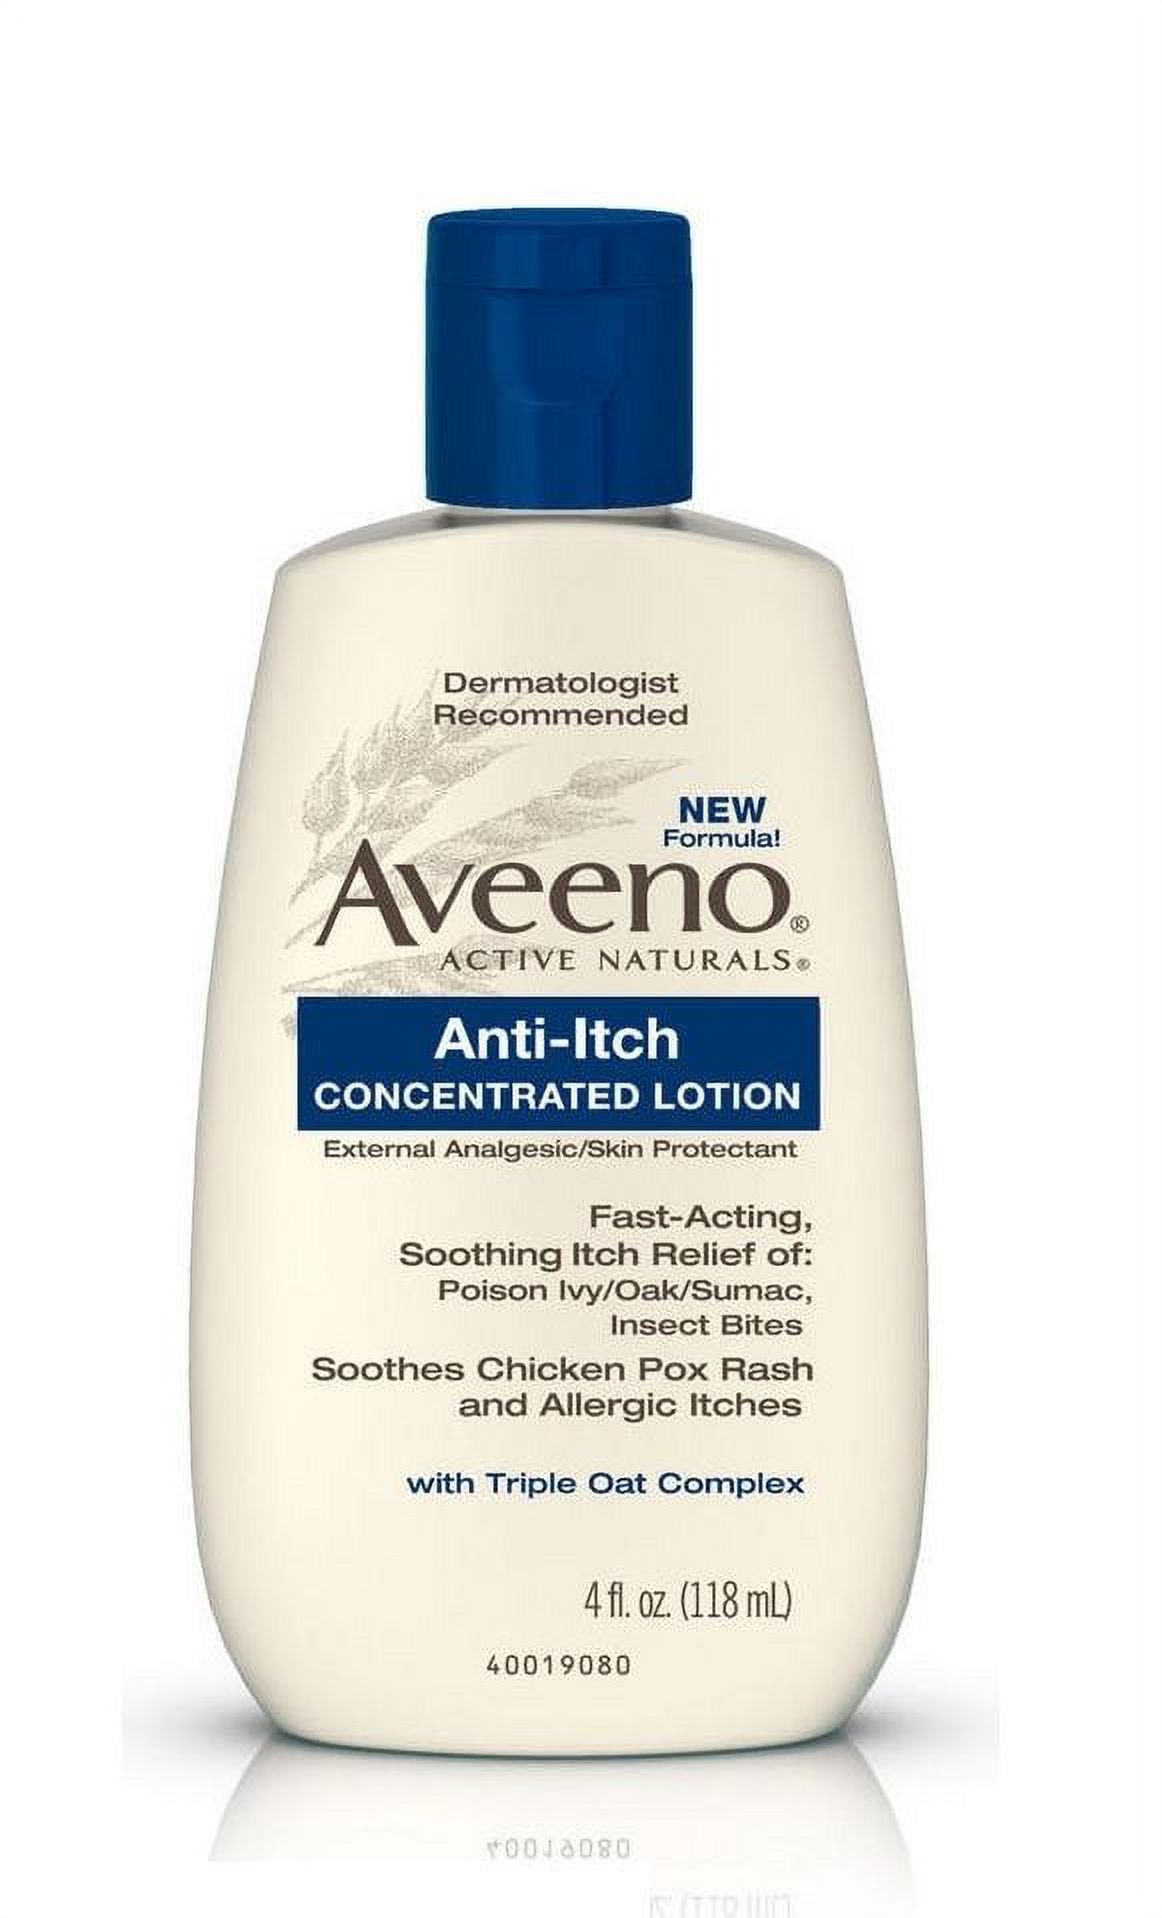 Aveeno Anti-Itch Concentrated Lotion - 4 oz - image 1 of 2